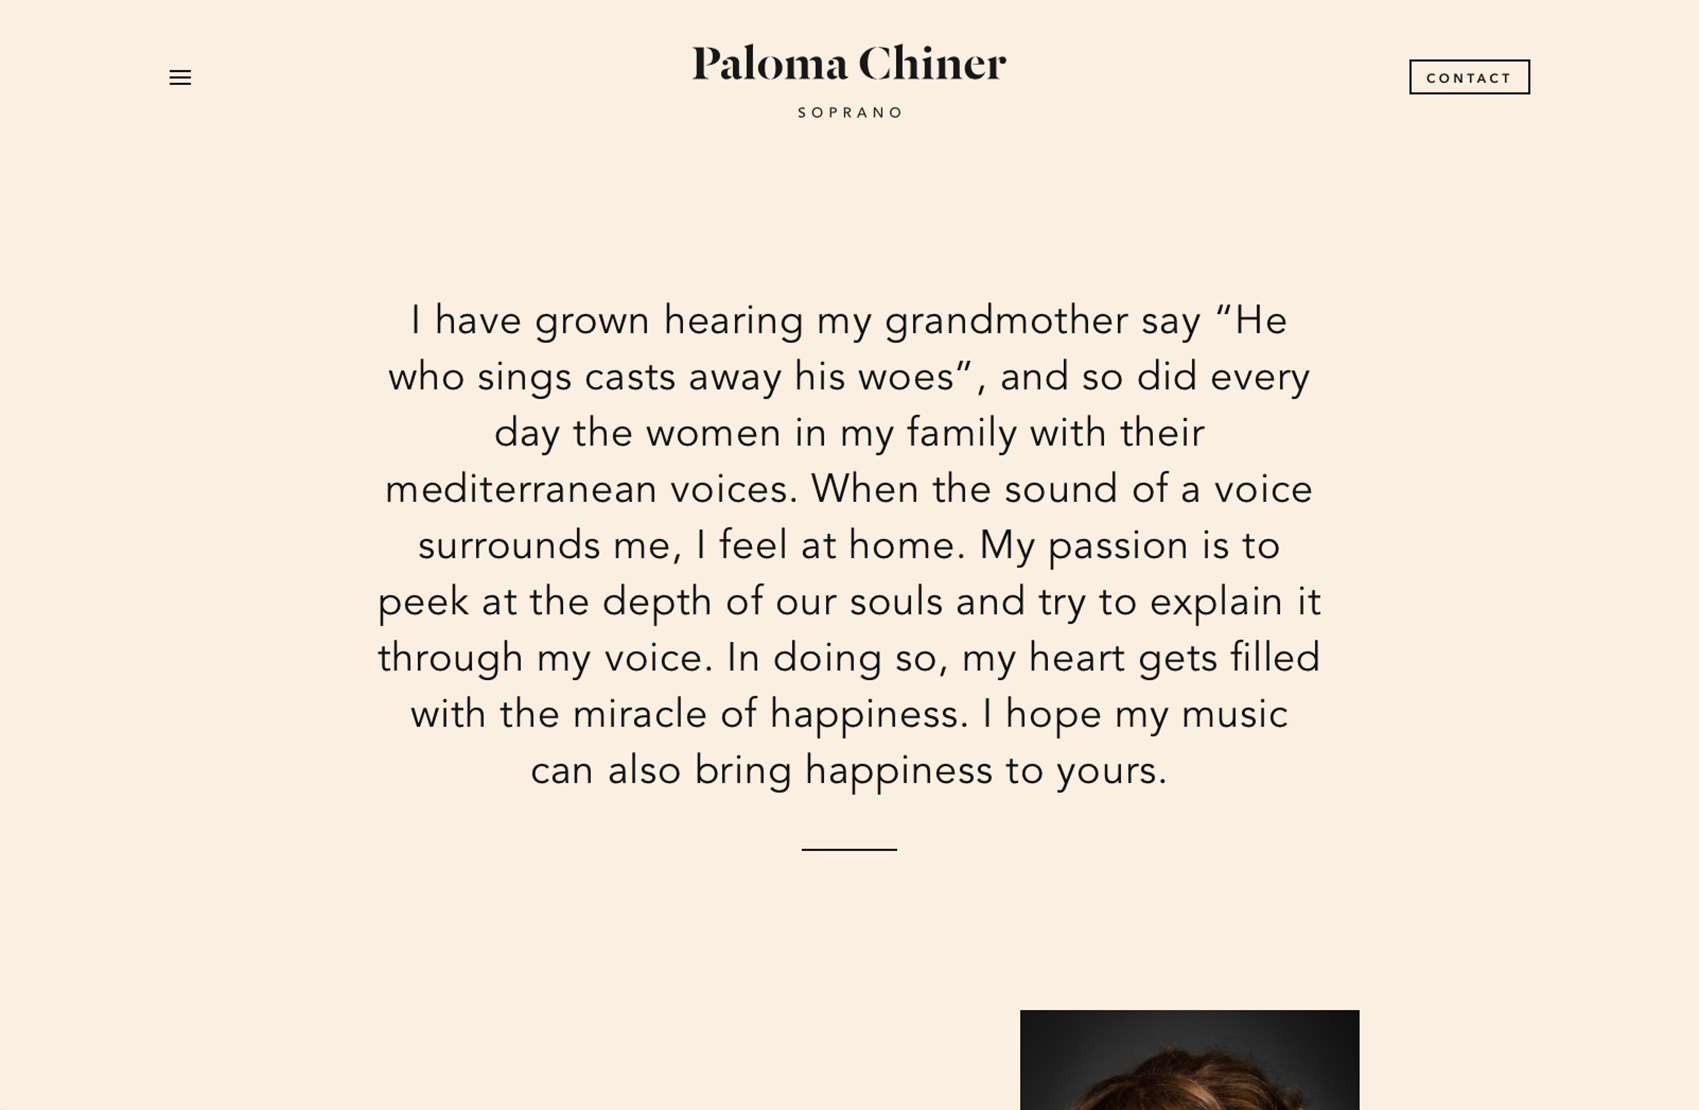 Paloma Chiner Soprano - Design and development of the new website